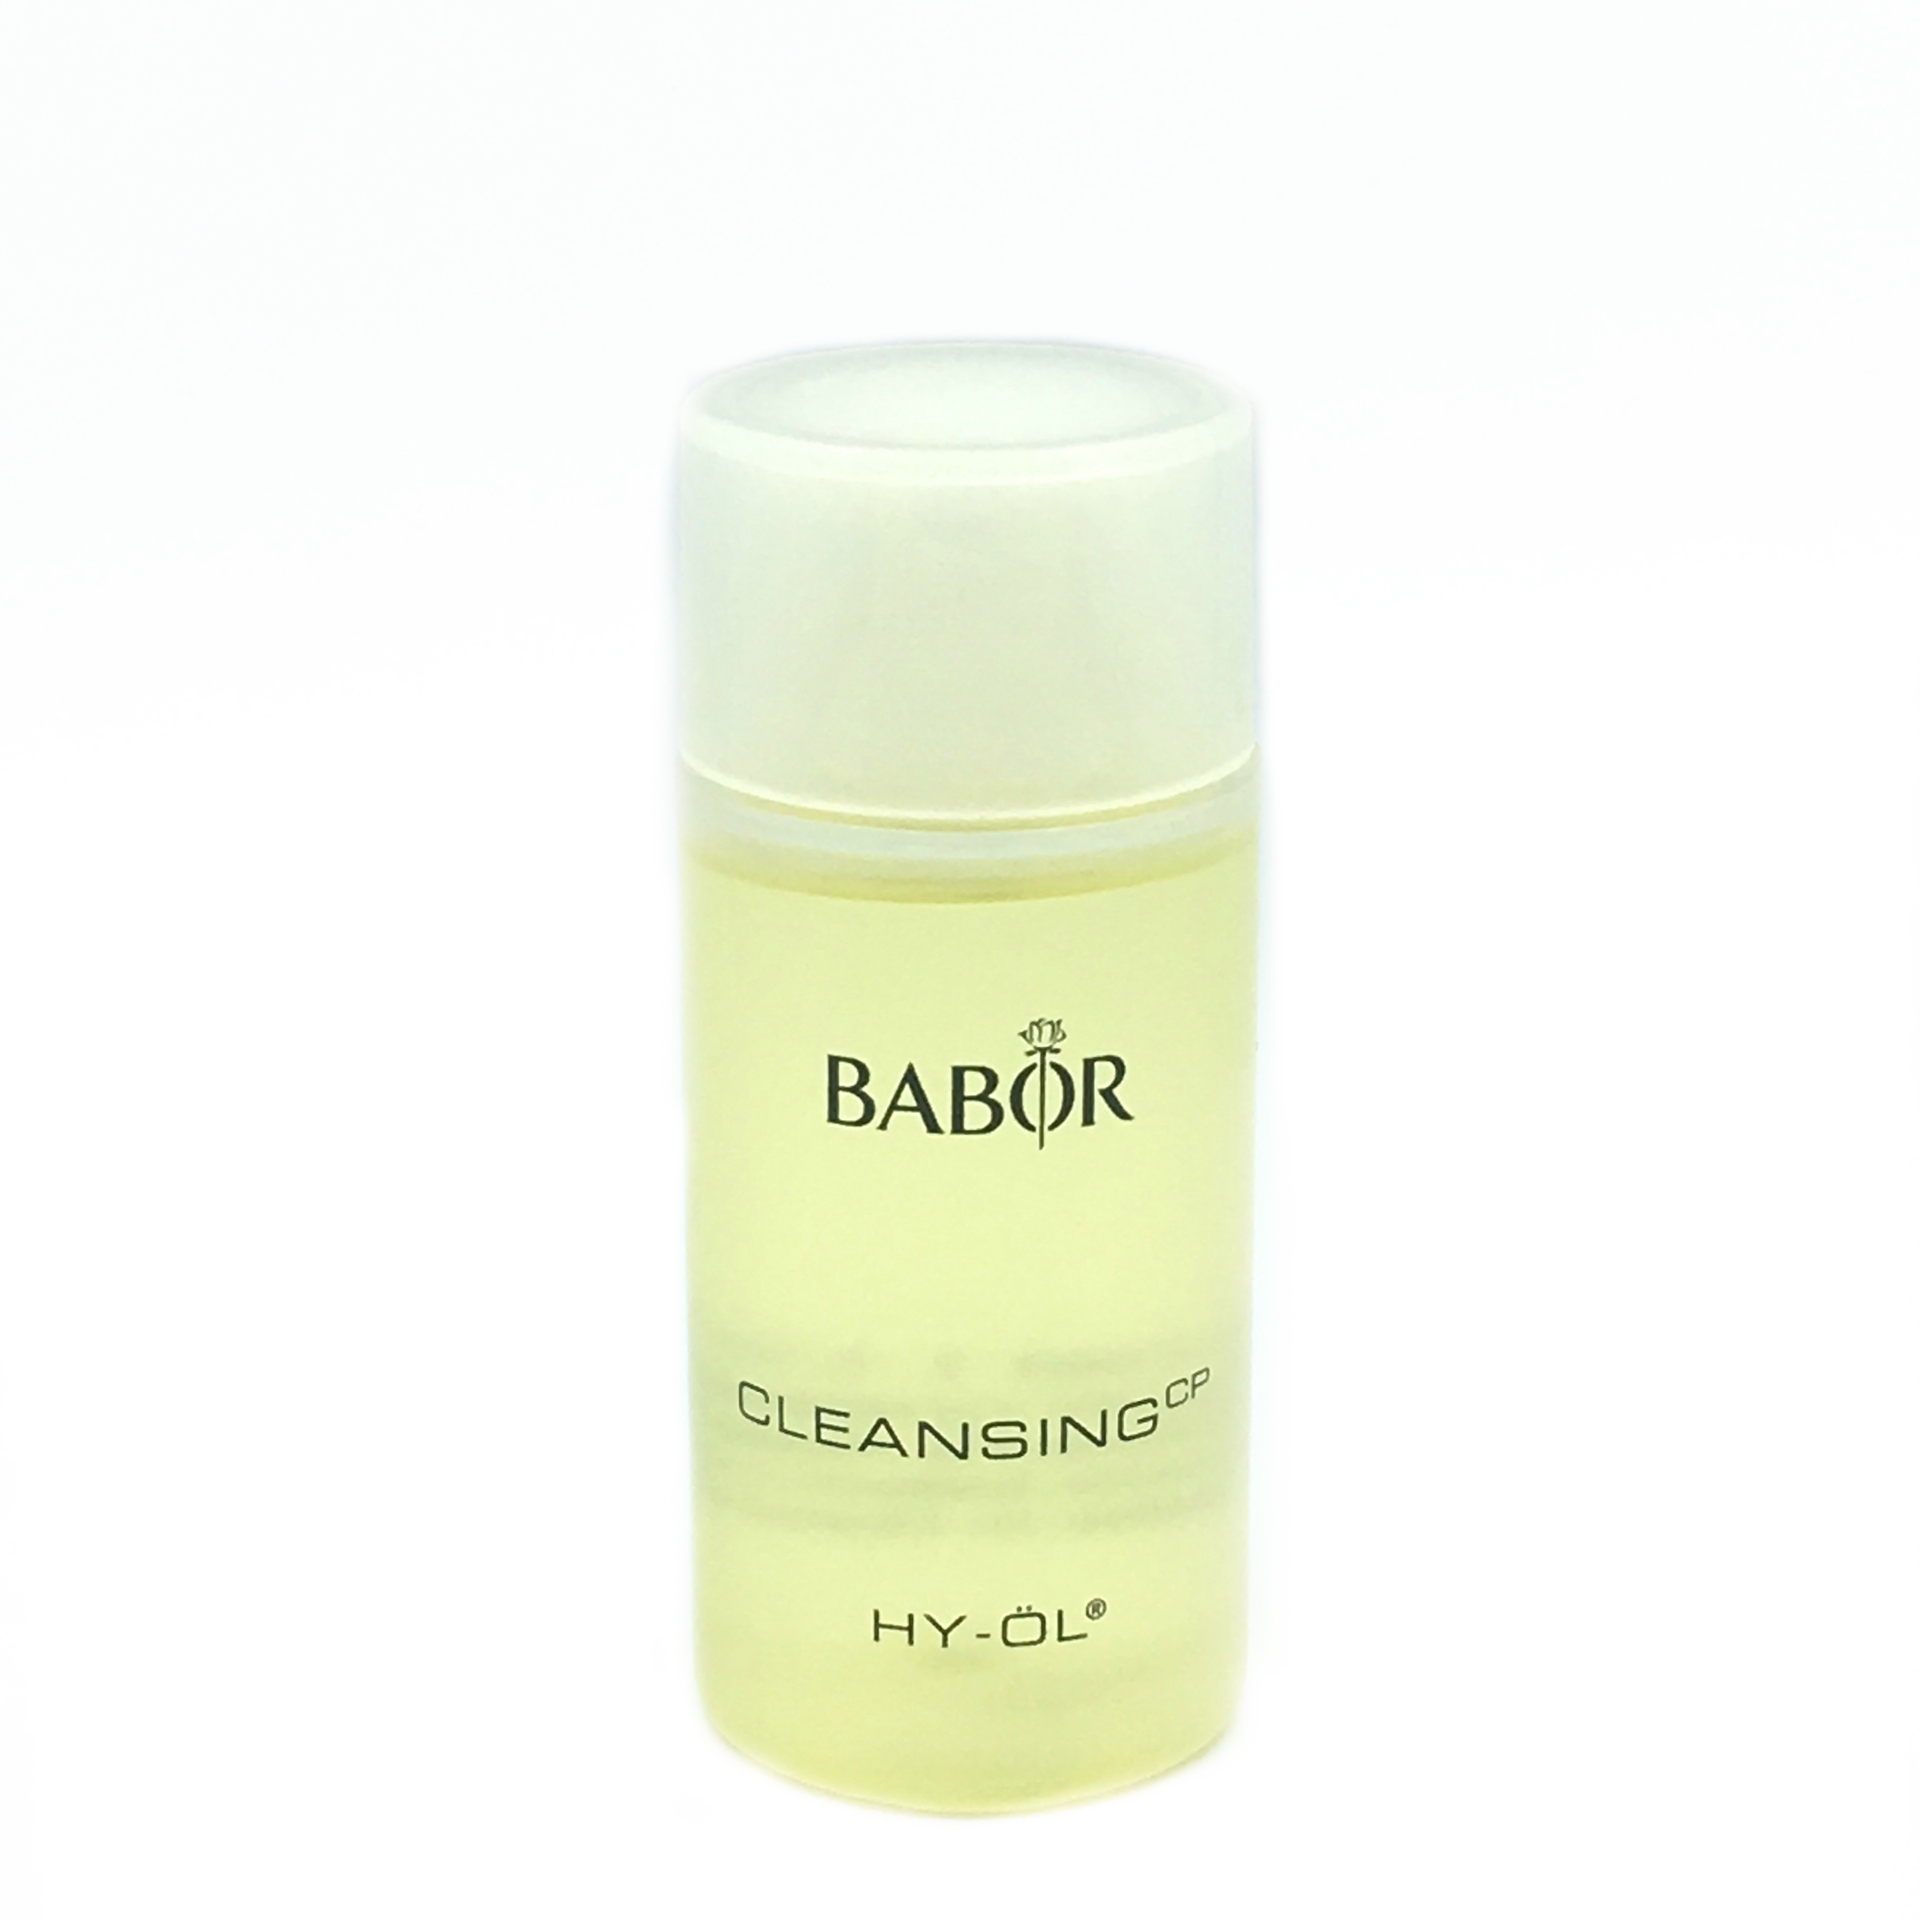 Babor Cleansing Hy-Ol Skin Care